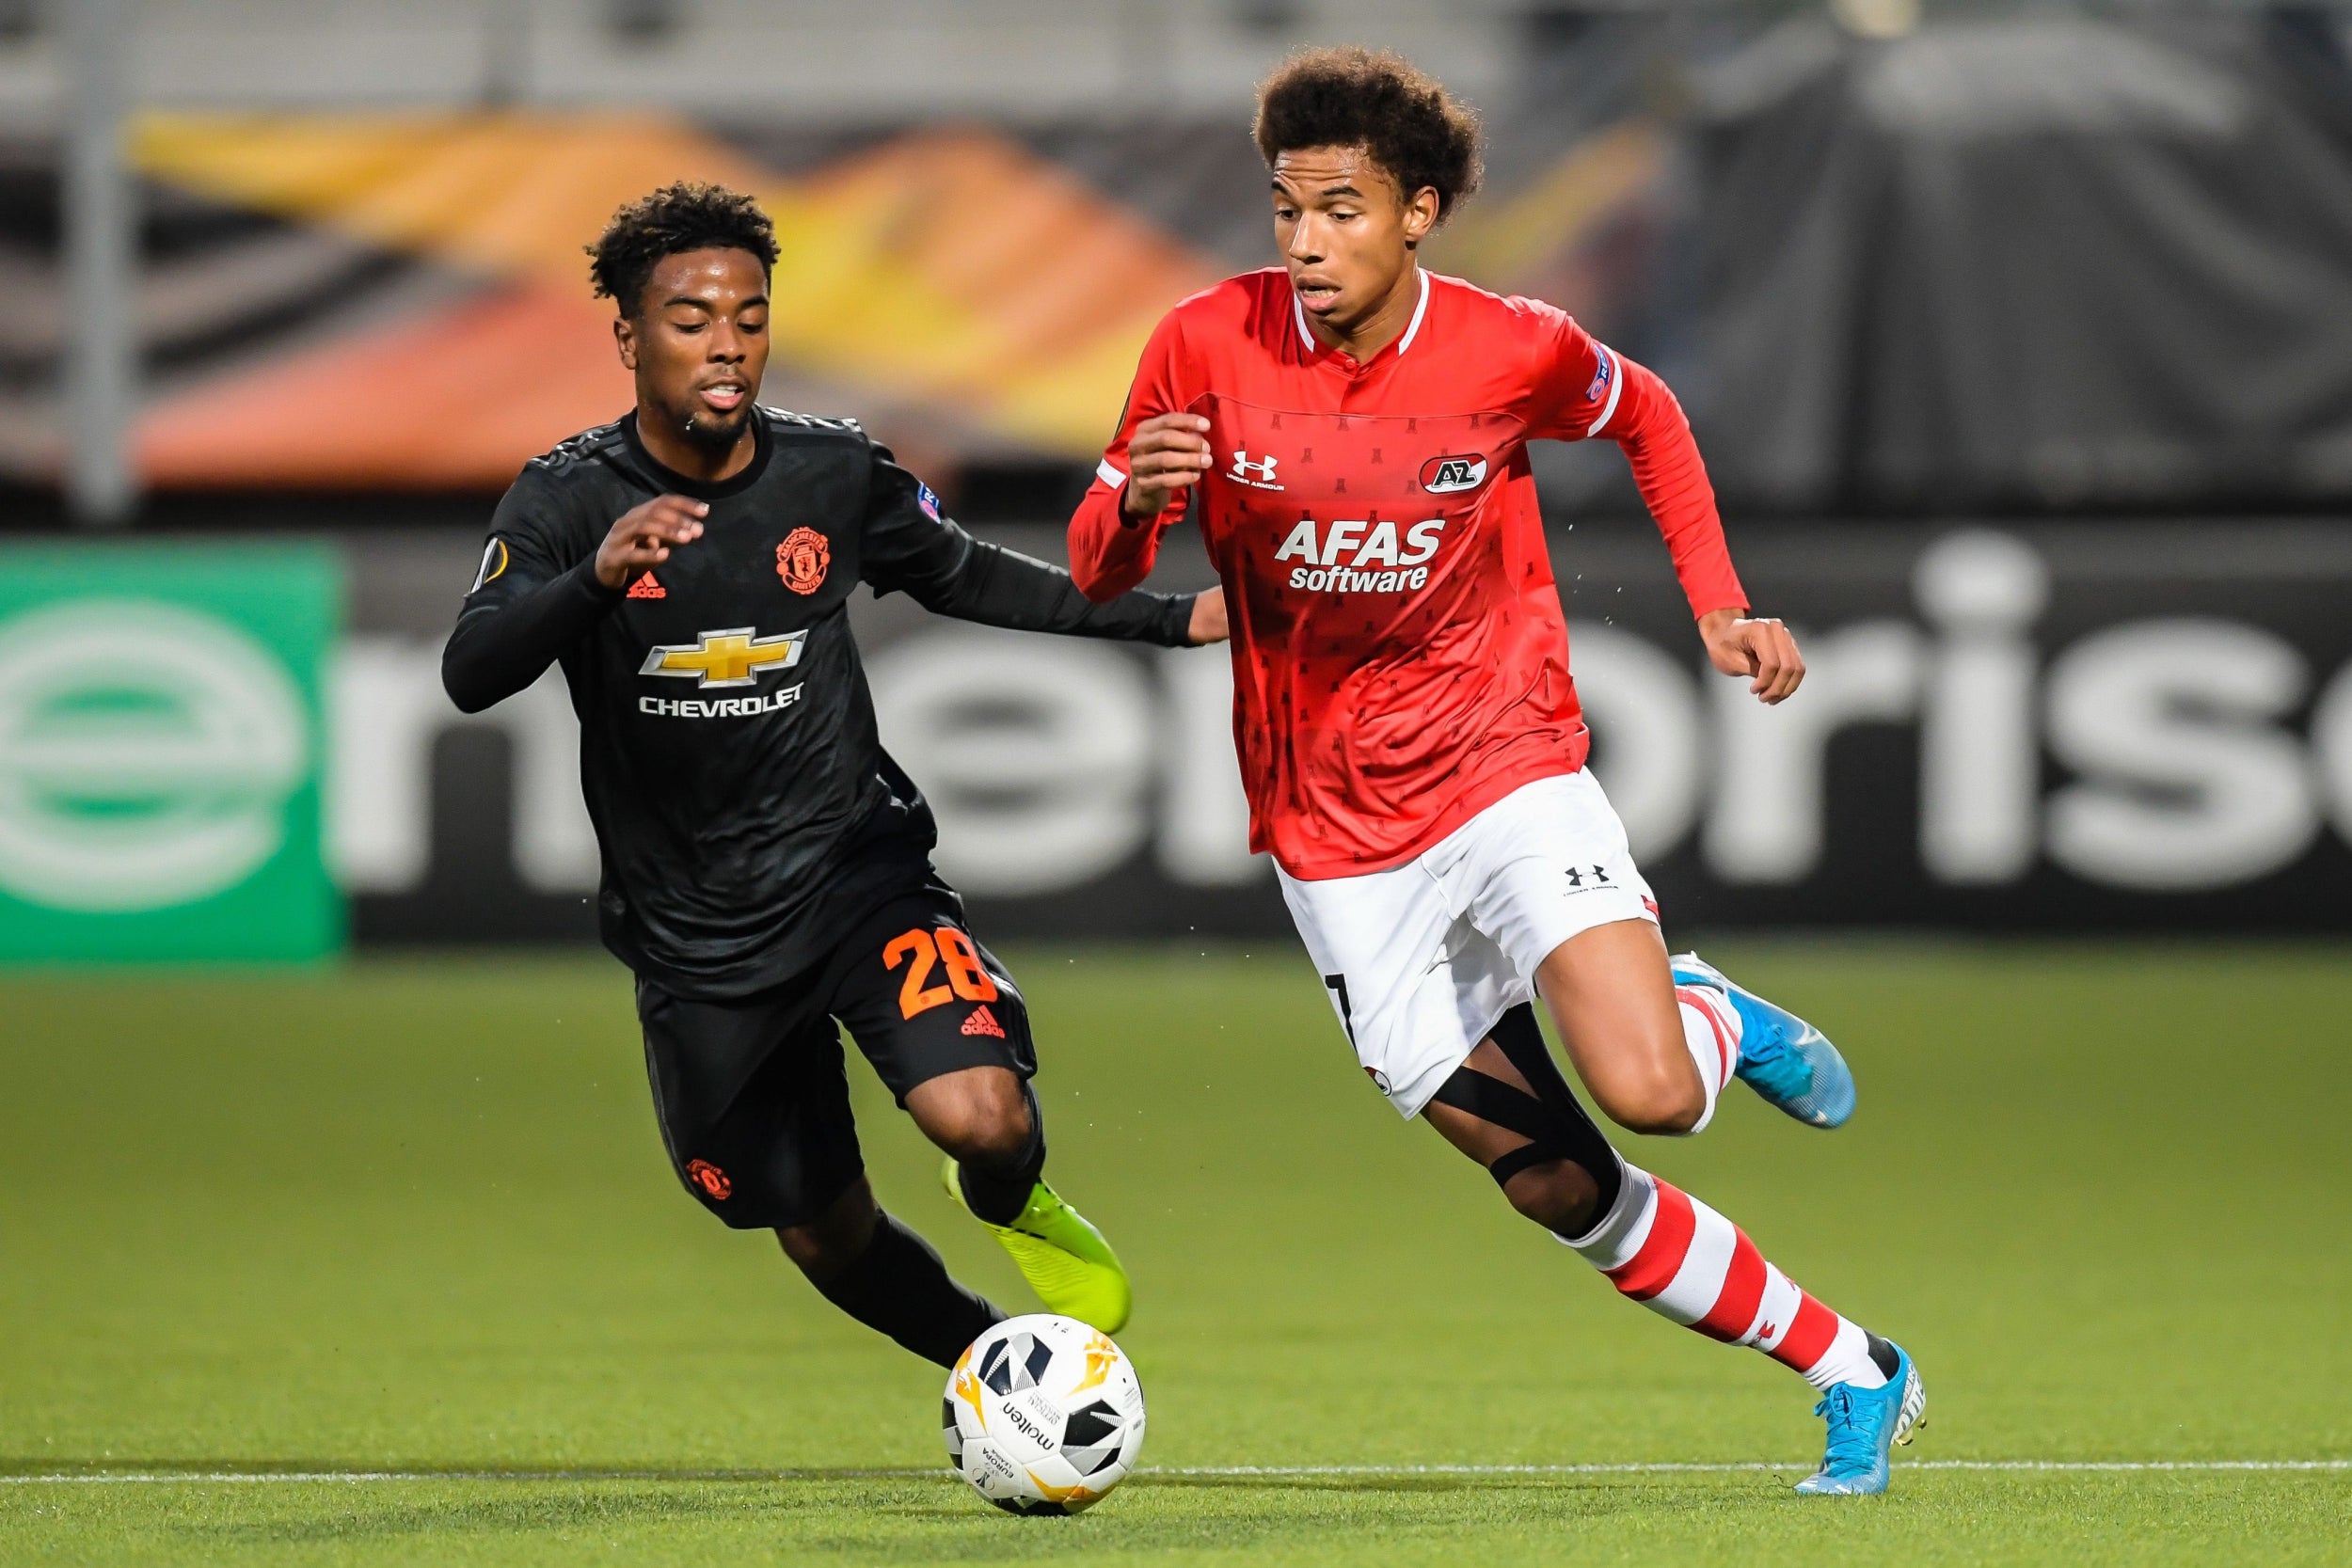 Angel Gomes tracks back in The Hague